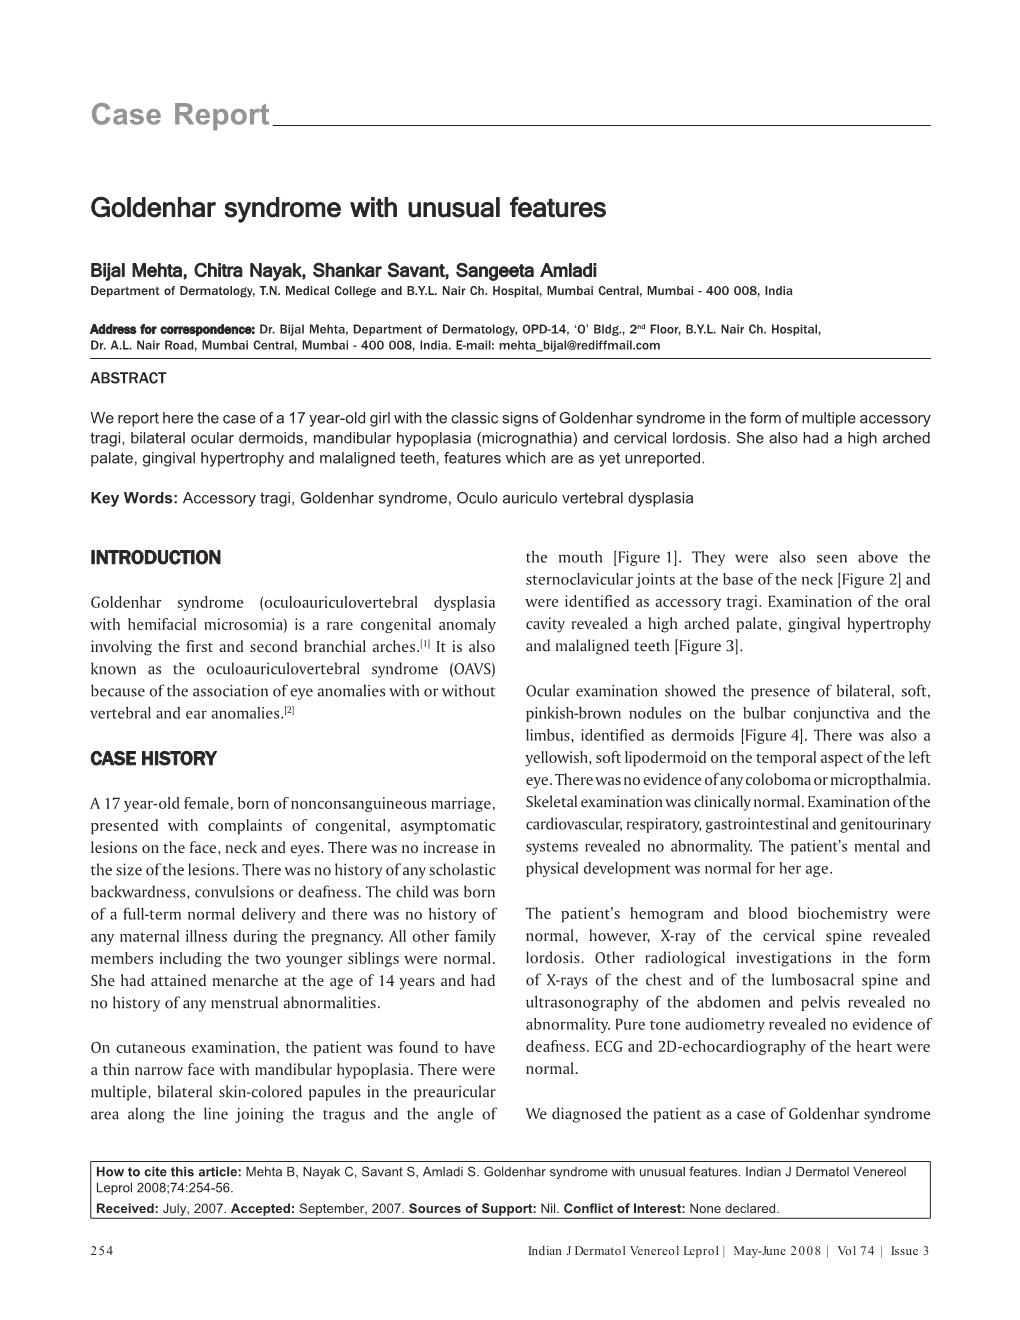 Goldenhar Syndrome with Unusual Features